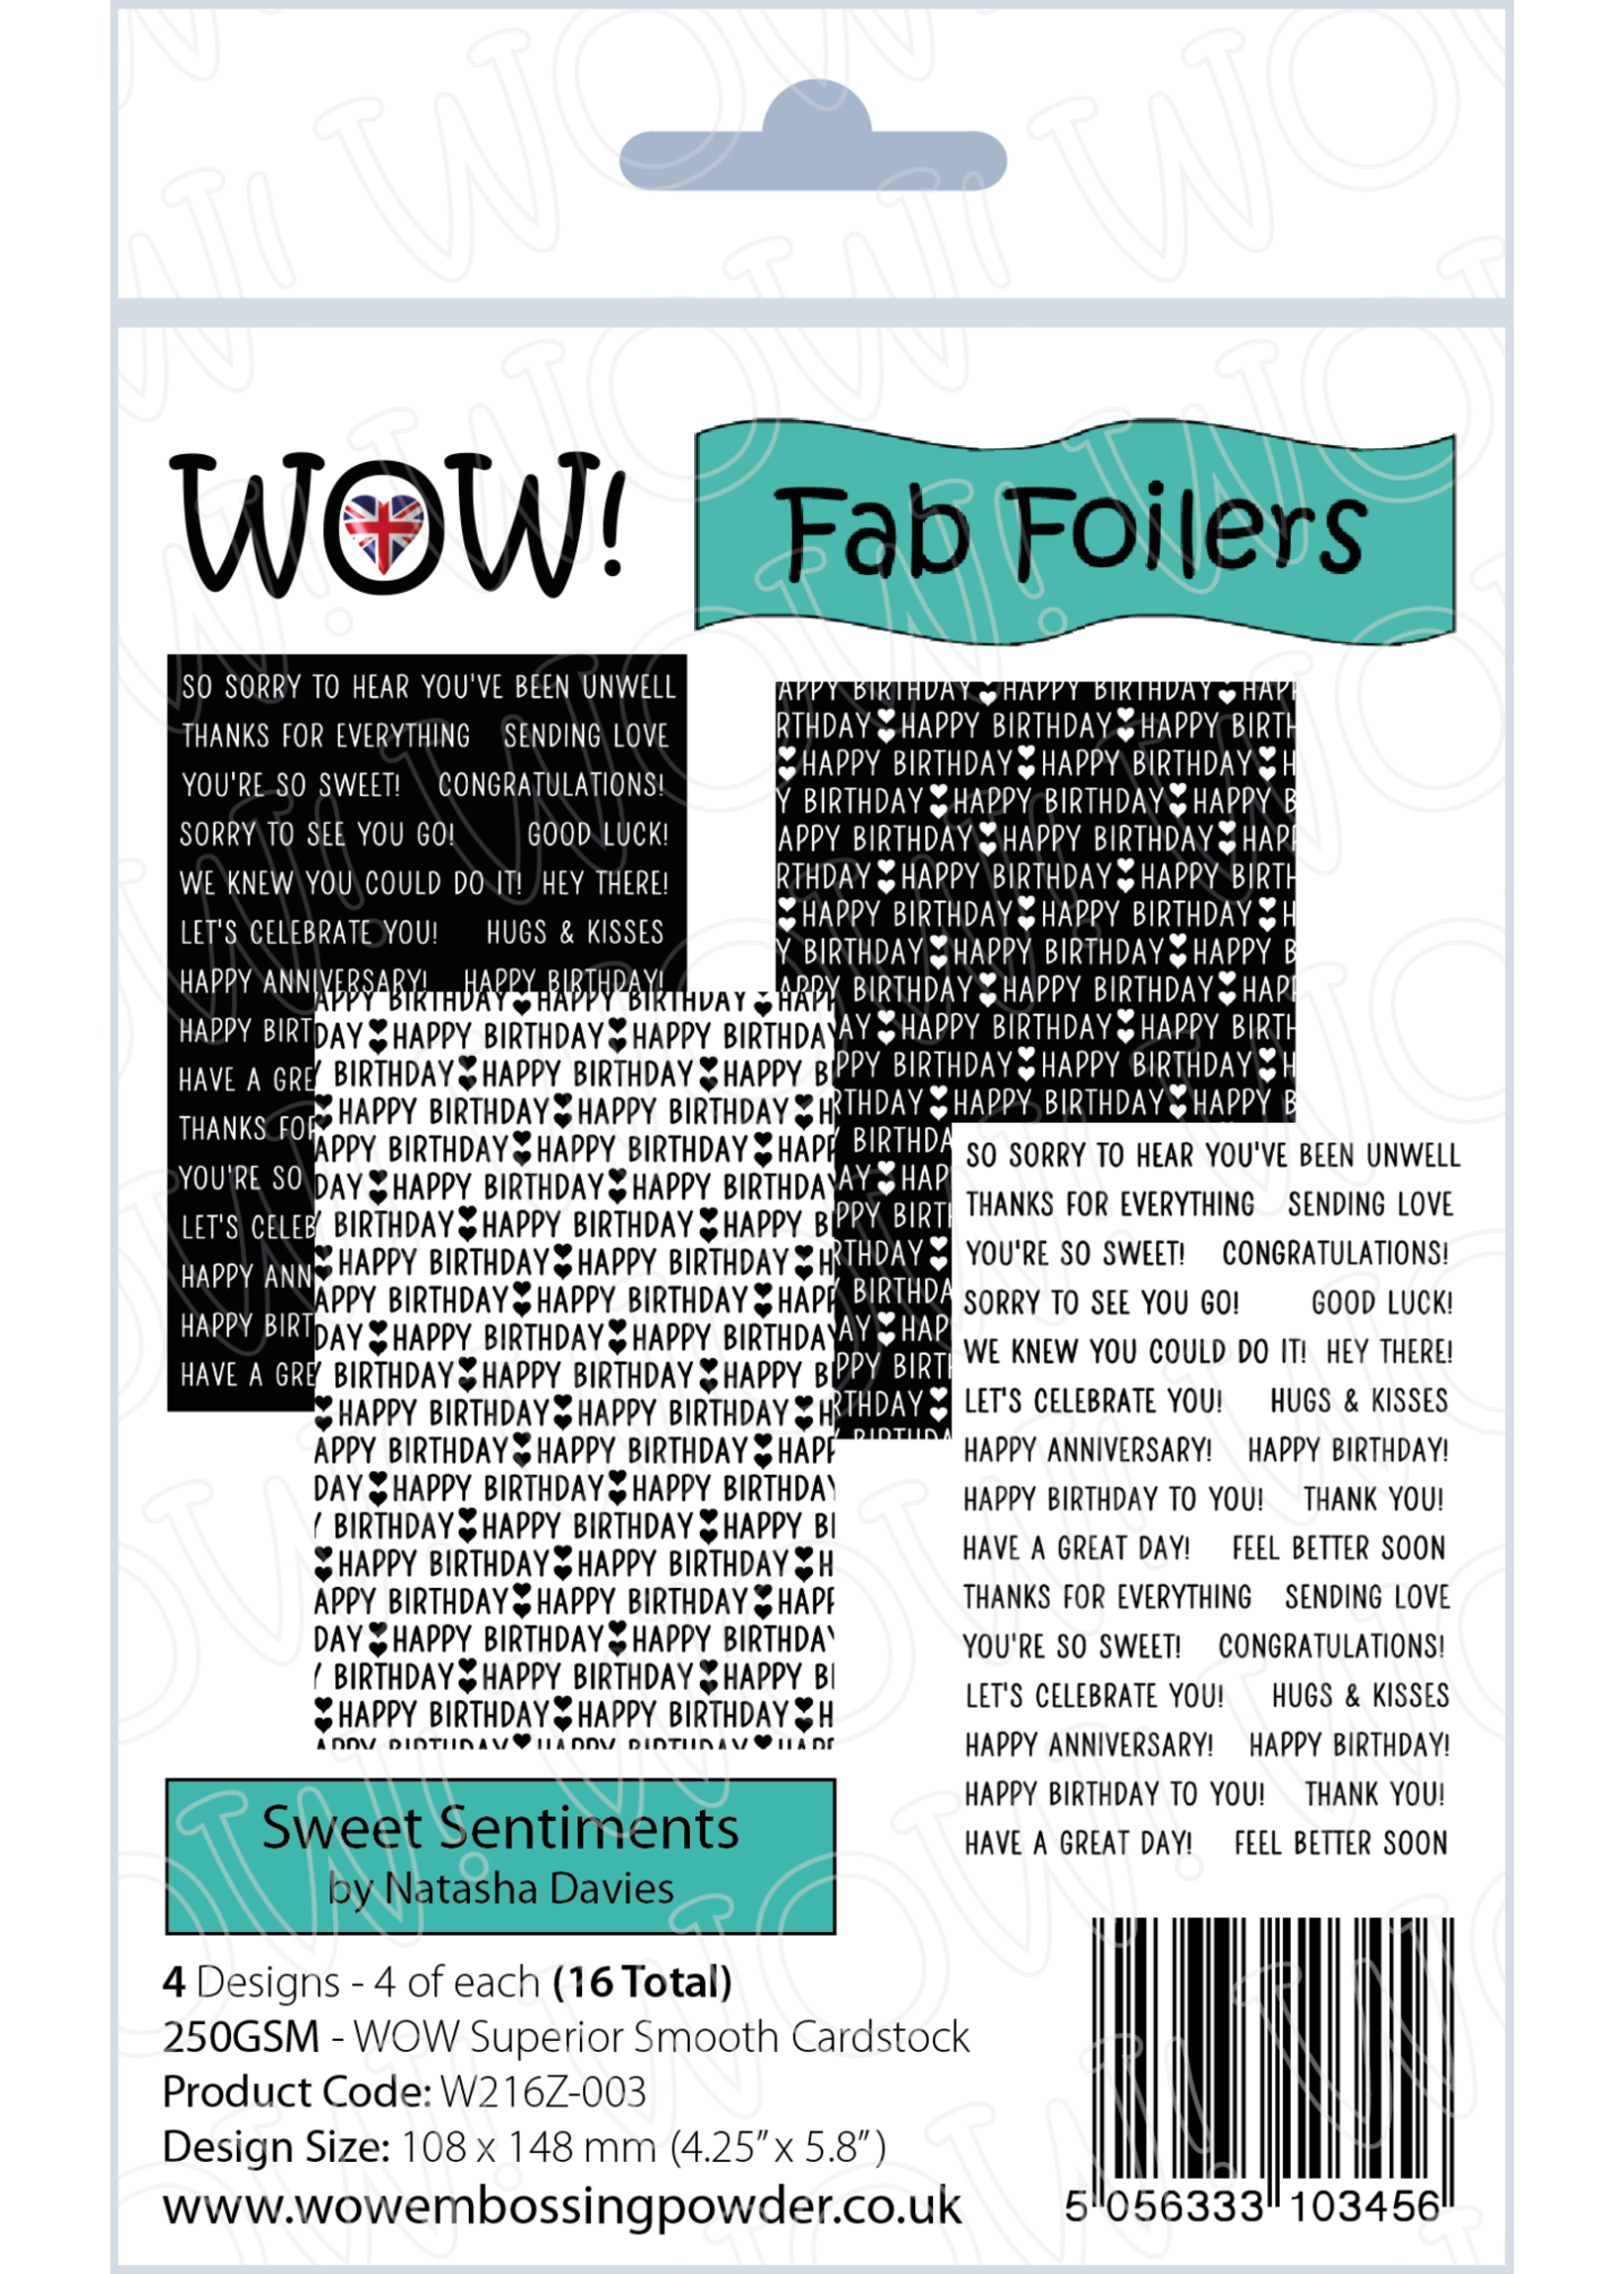 wow! Wow! Fab Foilers: Solid Panel